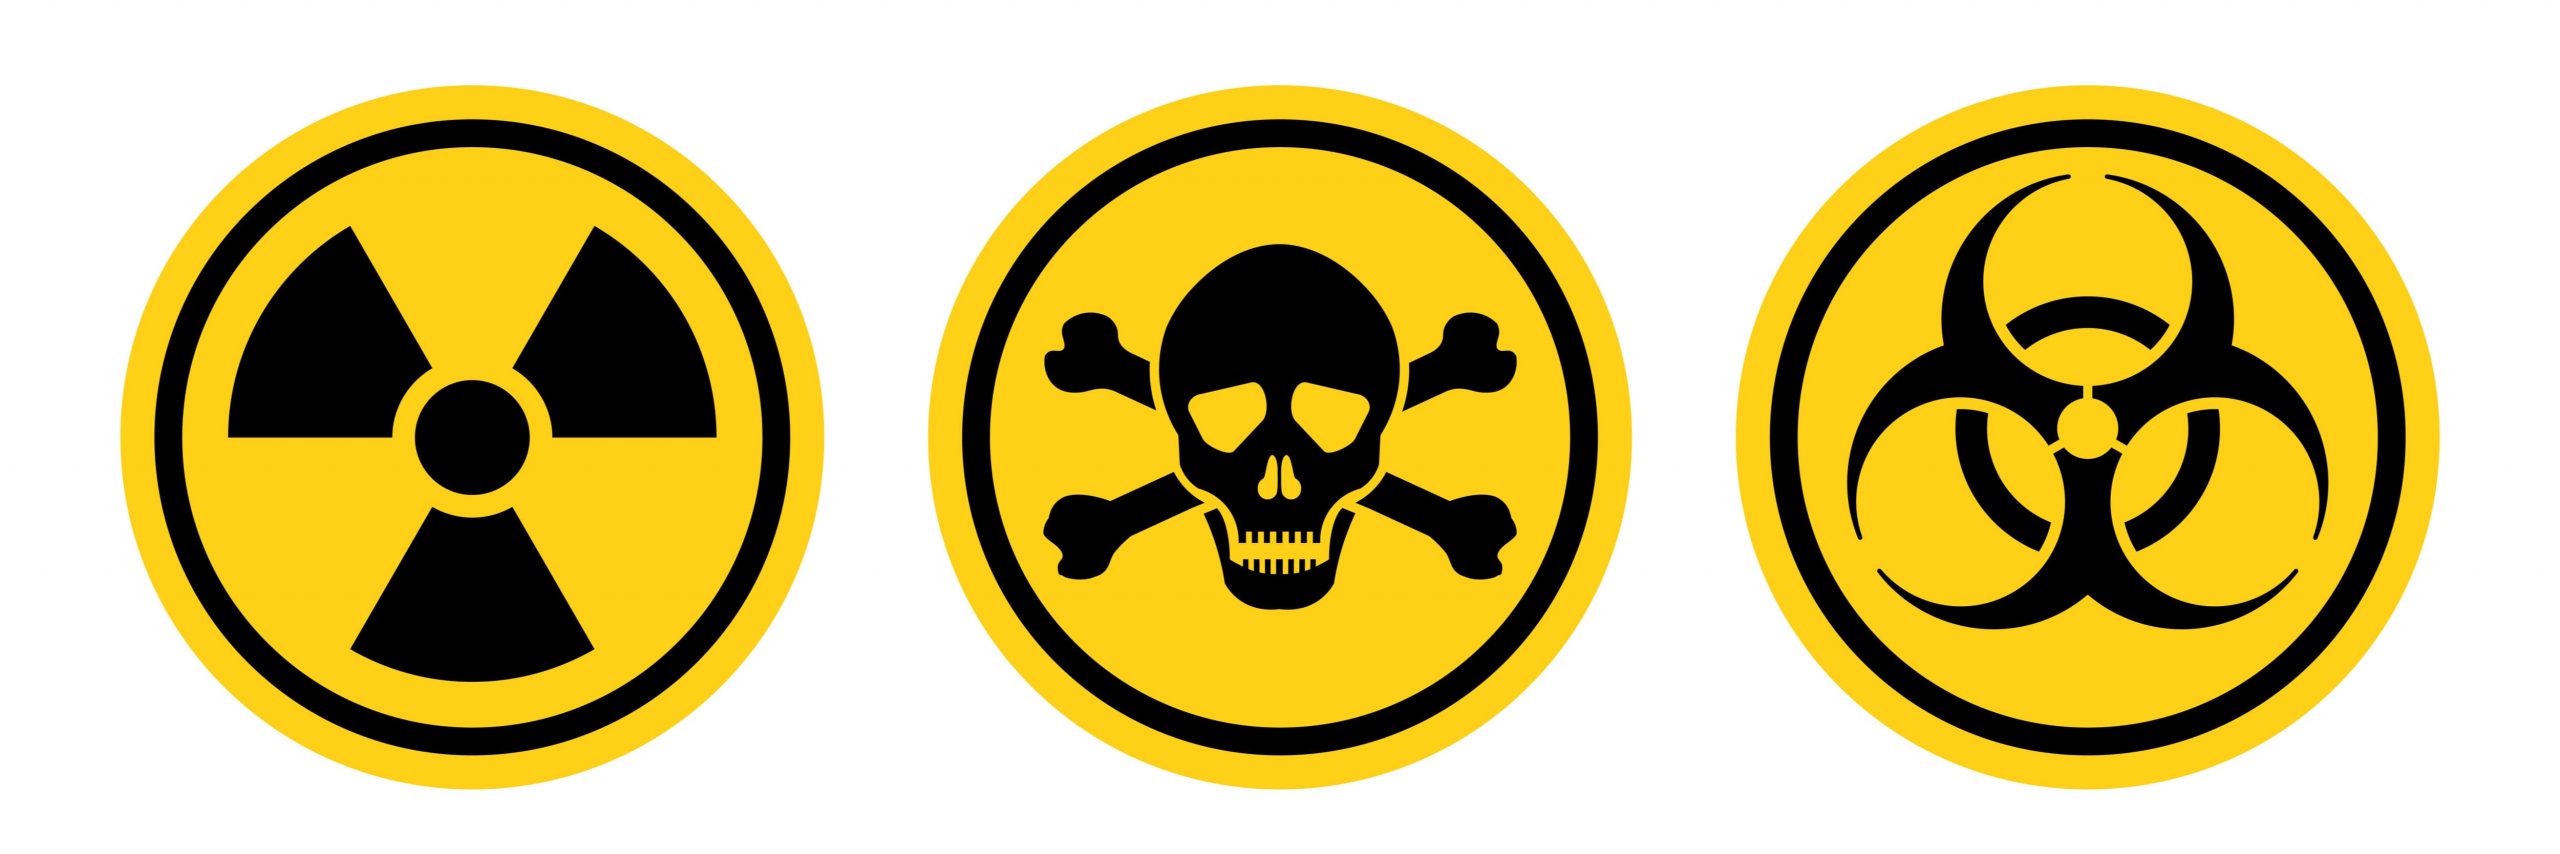 Radiation sign, Toxic sign and Bio hazard vector icon isolated on white background.